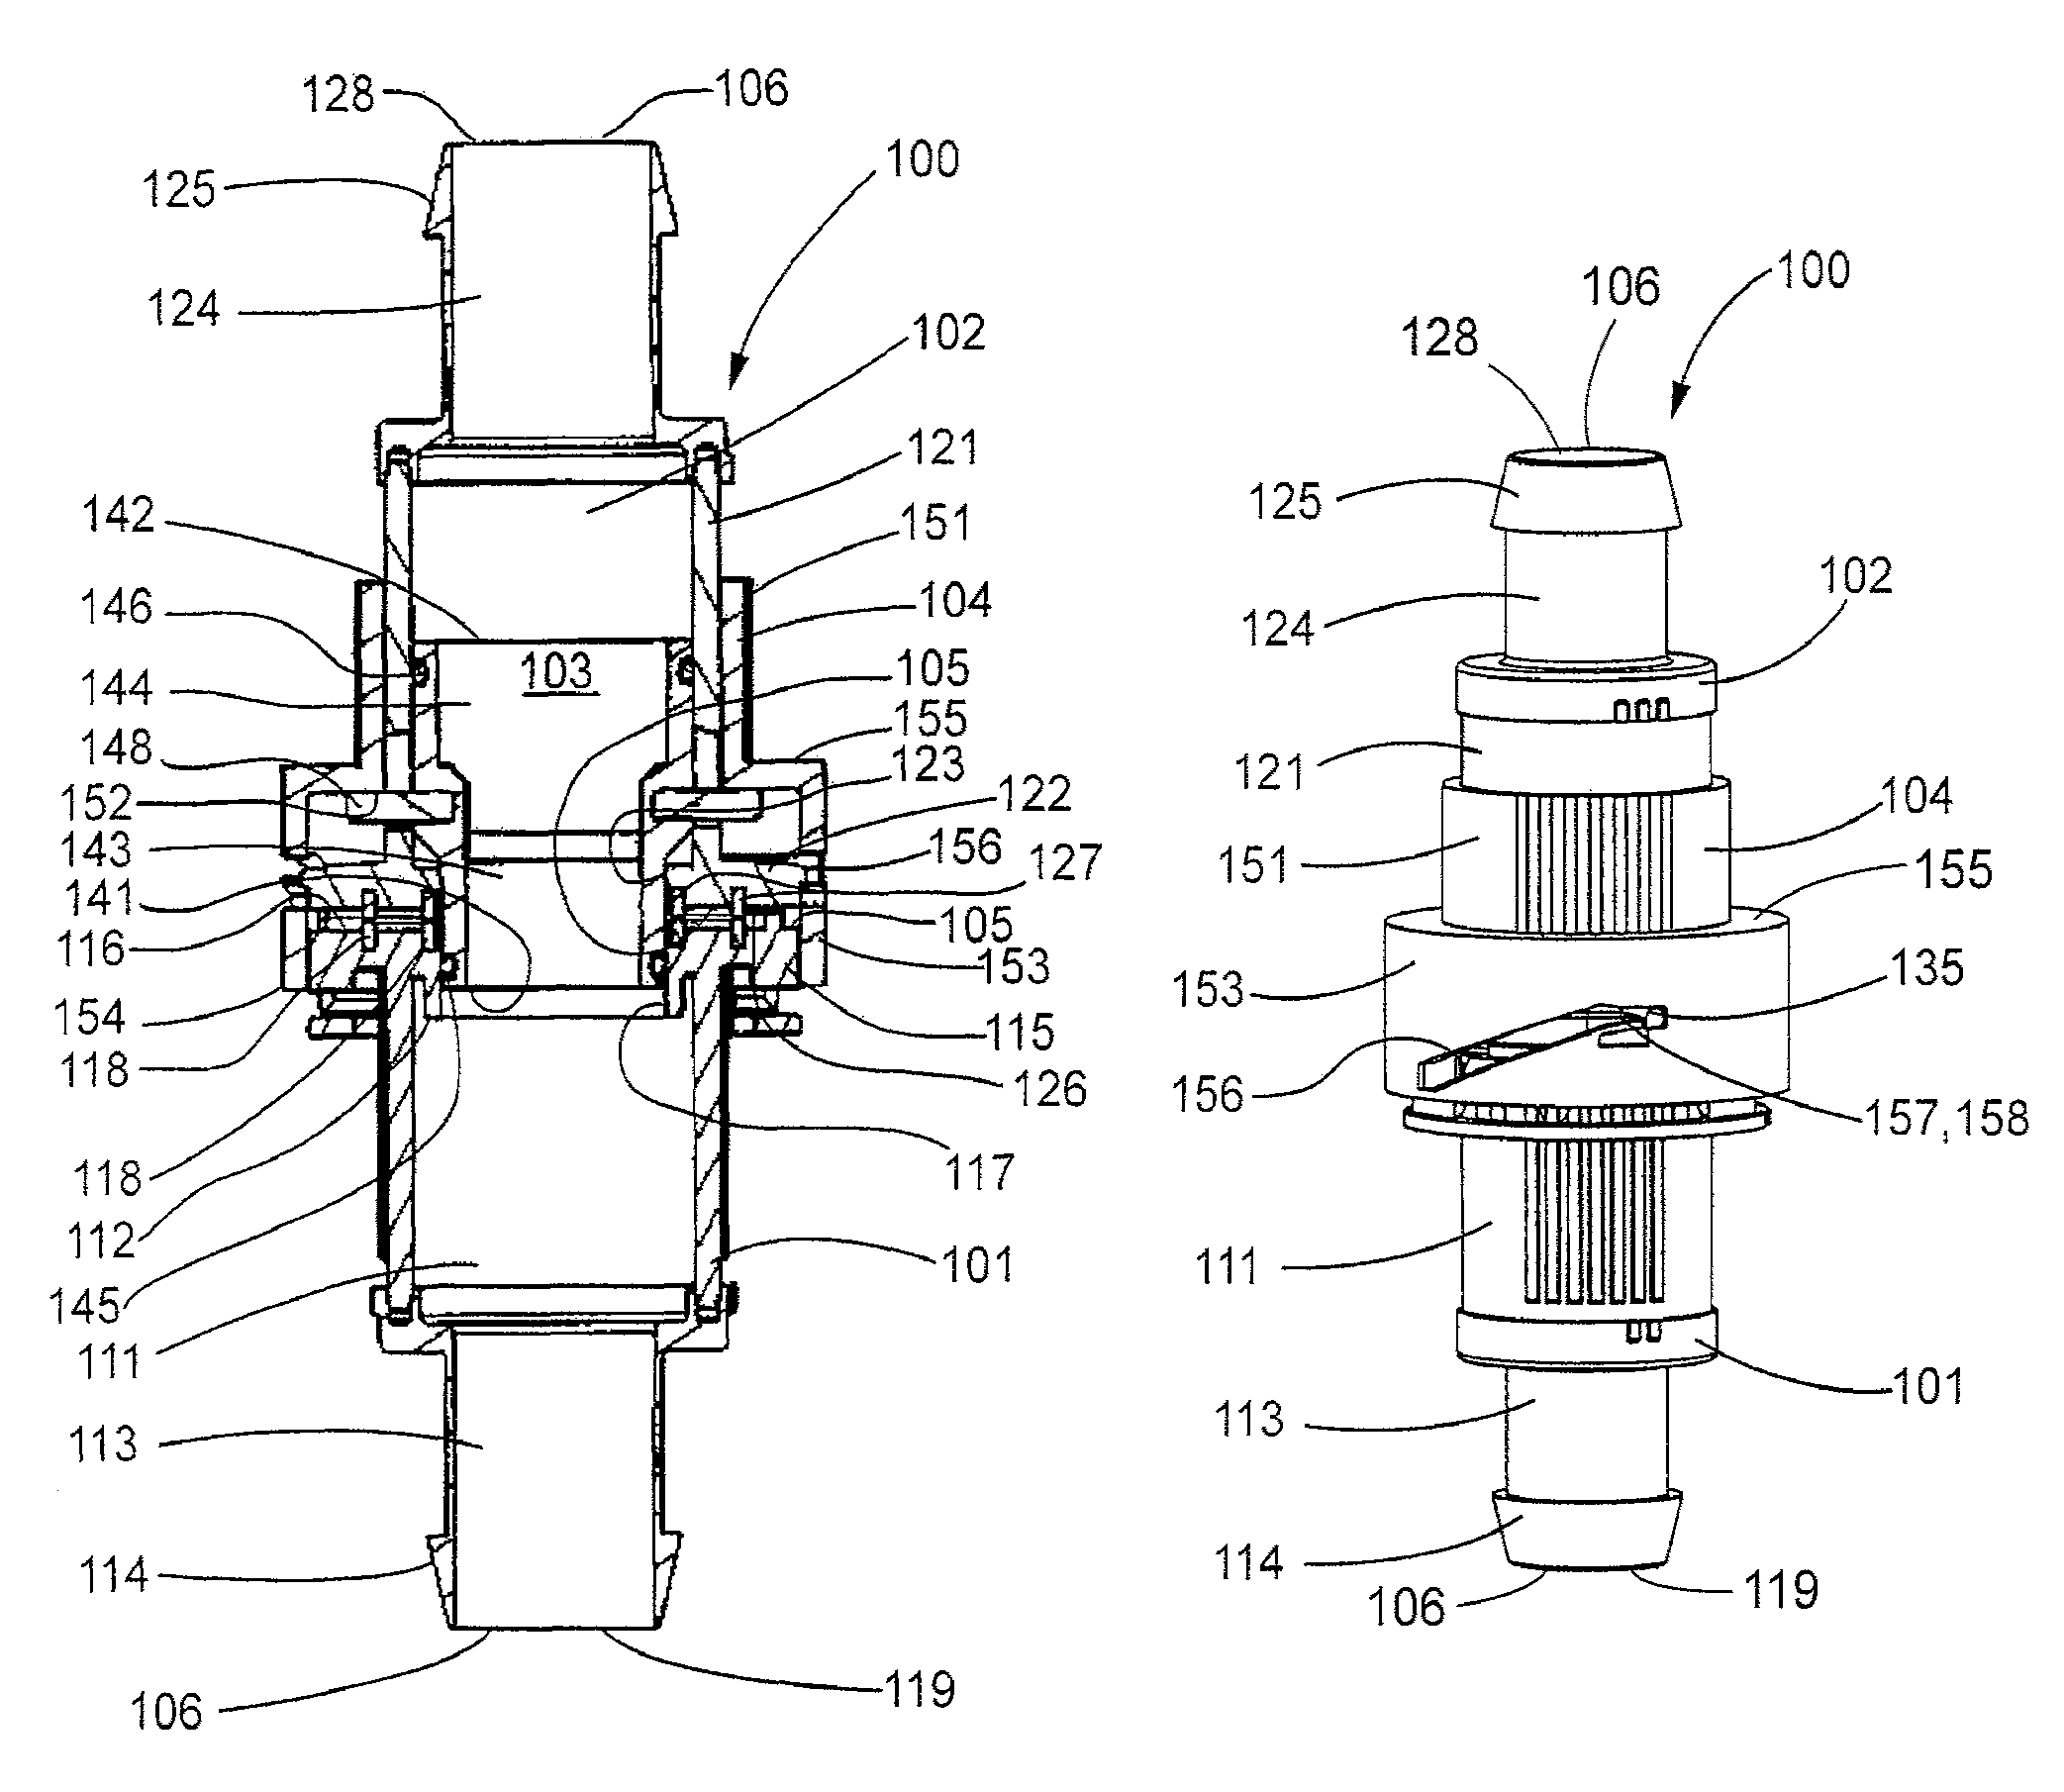 Connector assemblies, fluid systems including connector assemblies, and procedures for making fluid connections